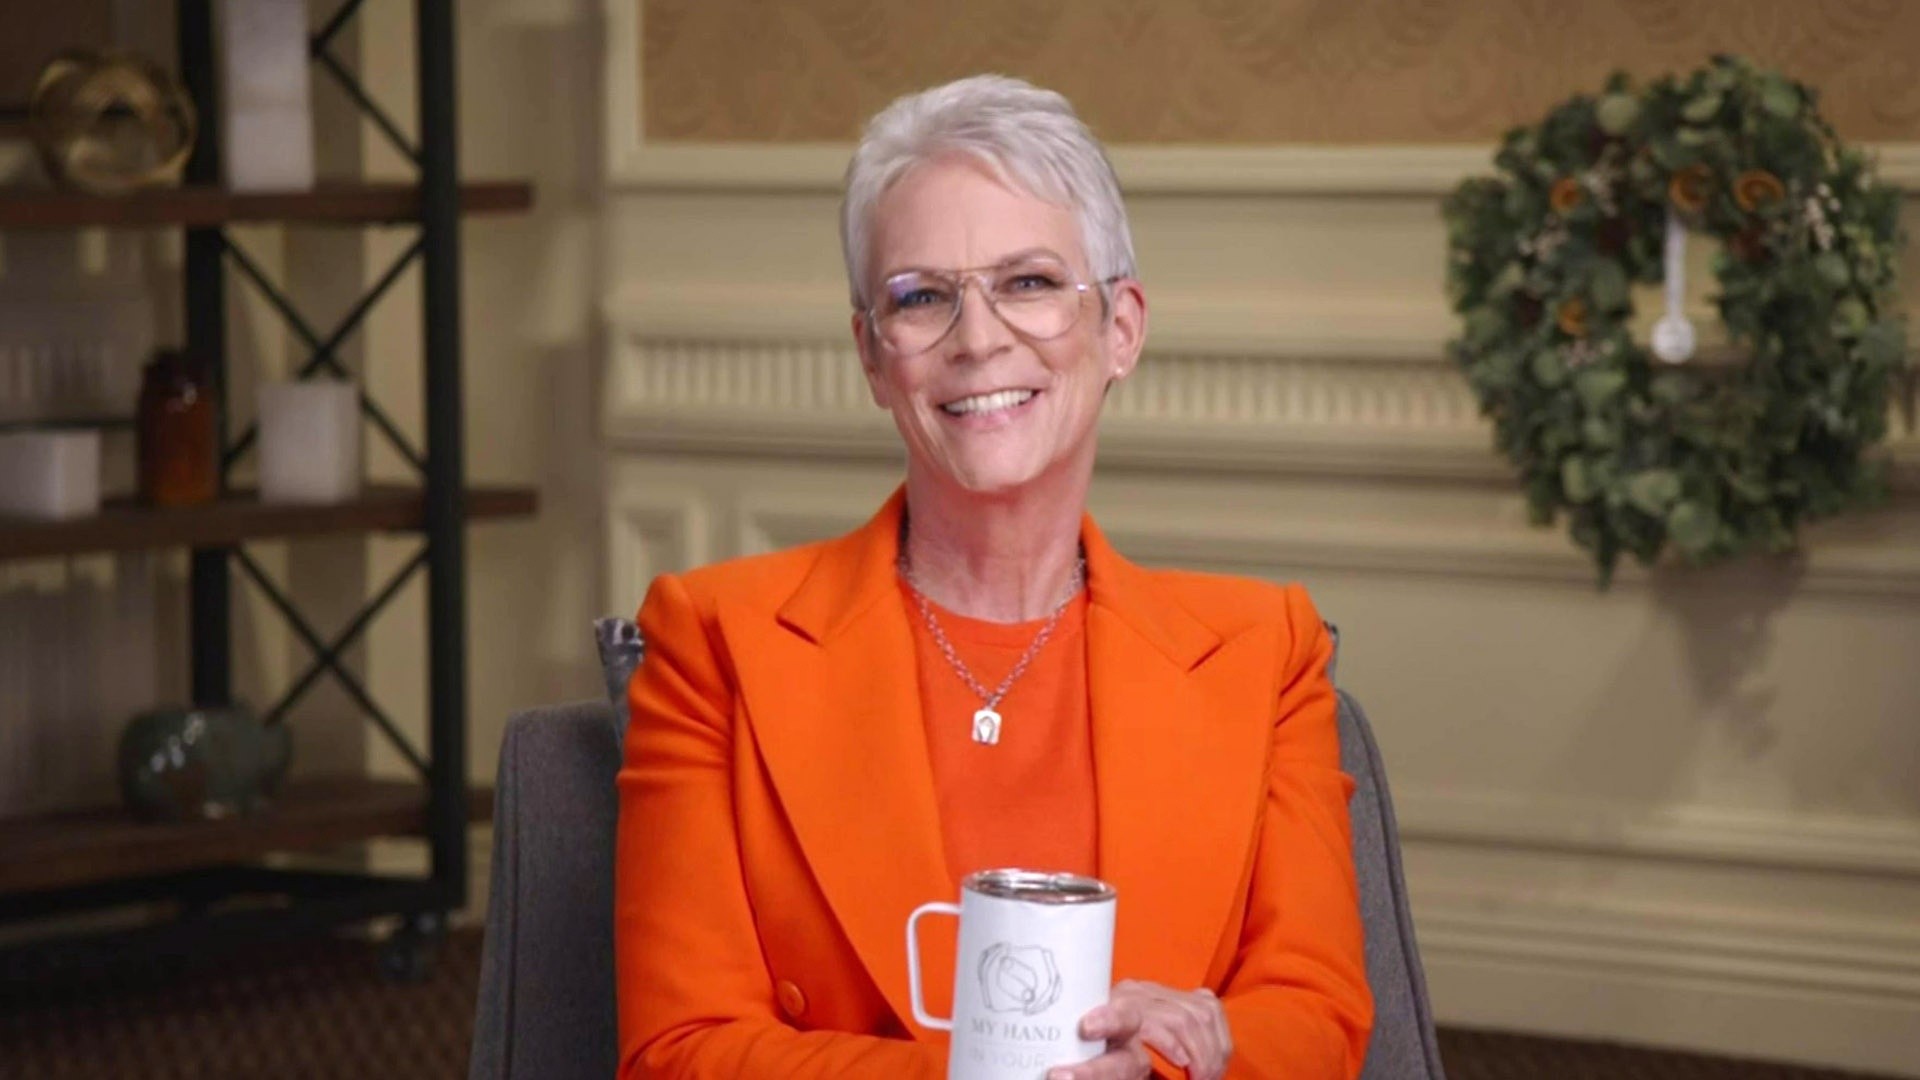 Jamie Lee Curtis Revisits Wigmaker That Made Her The Bear Hair